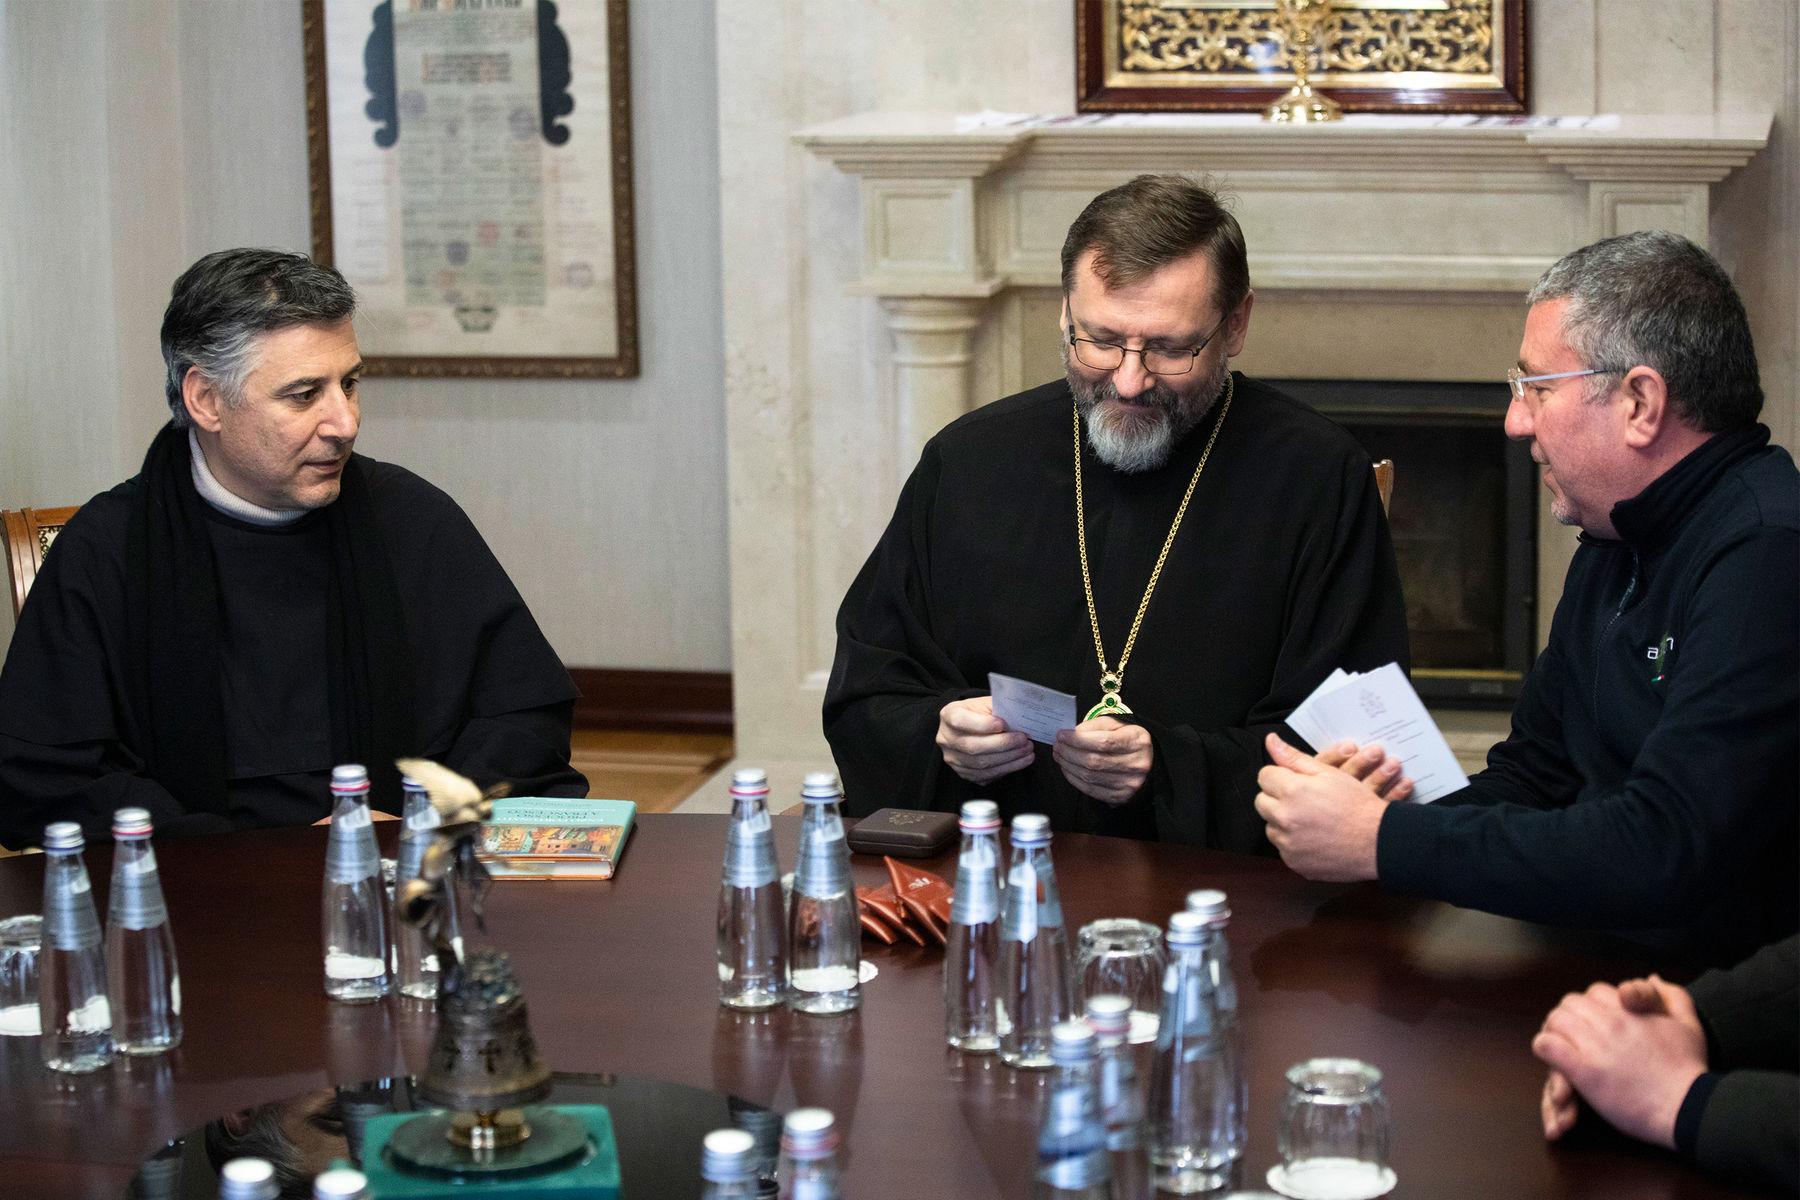 By showing mercy, we concede that people and their dignity are always more significant than the alms we give them: His Beatitude Sviatoslav to the delegation from Italy 